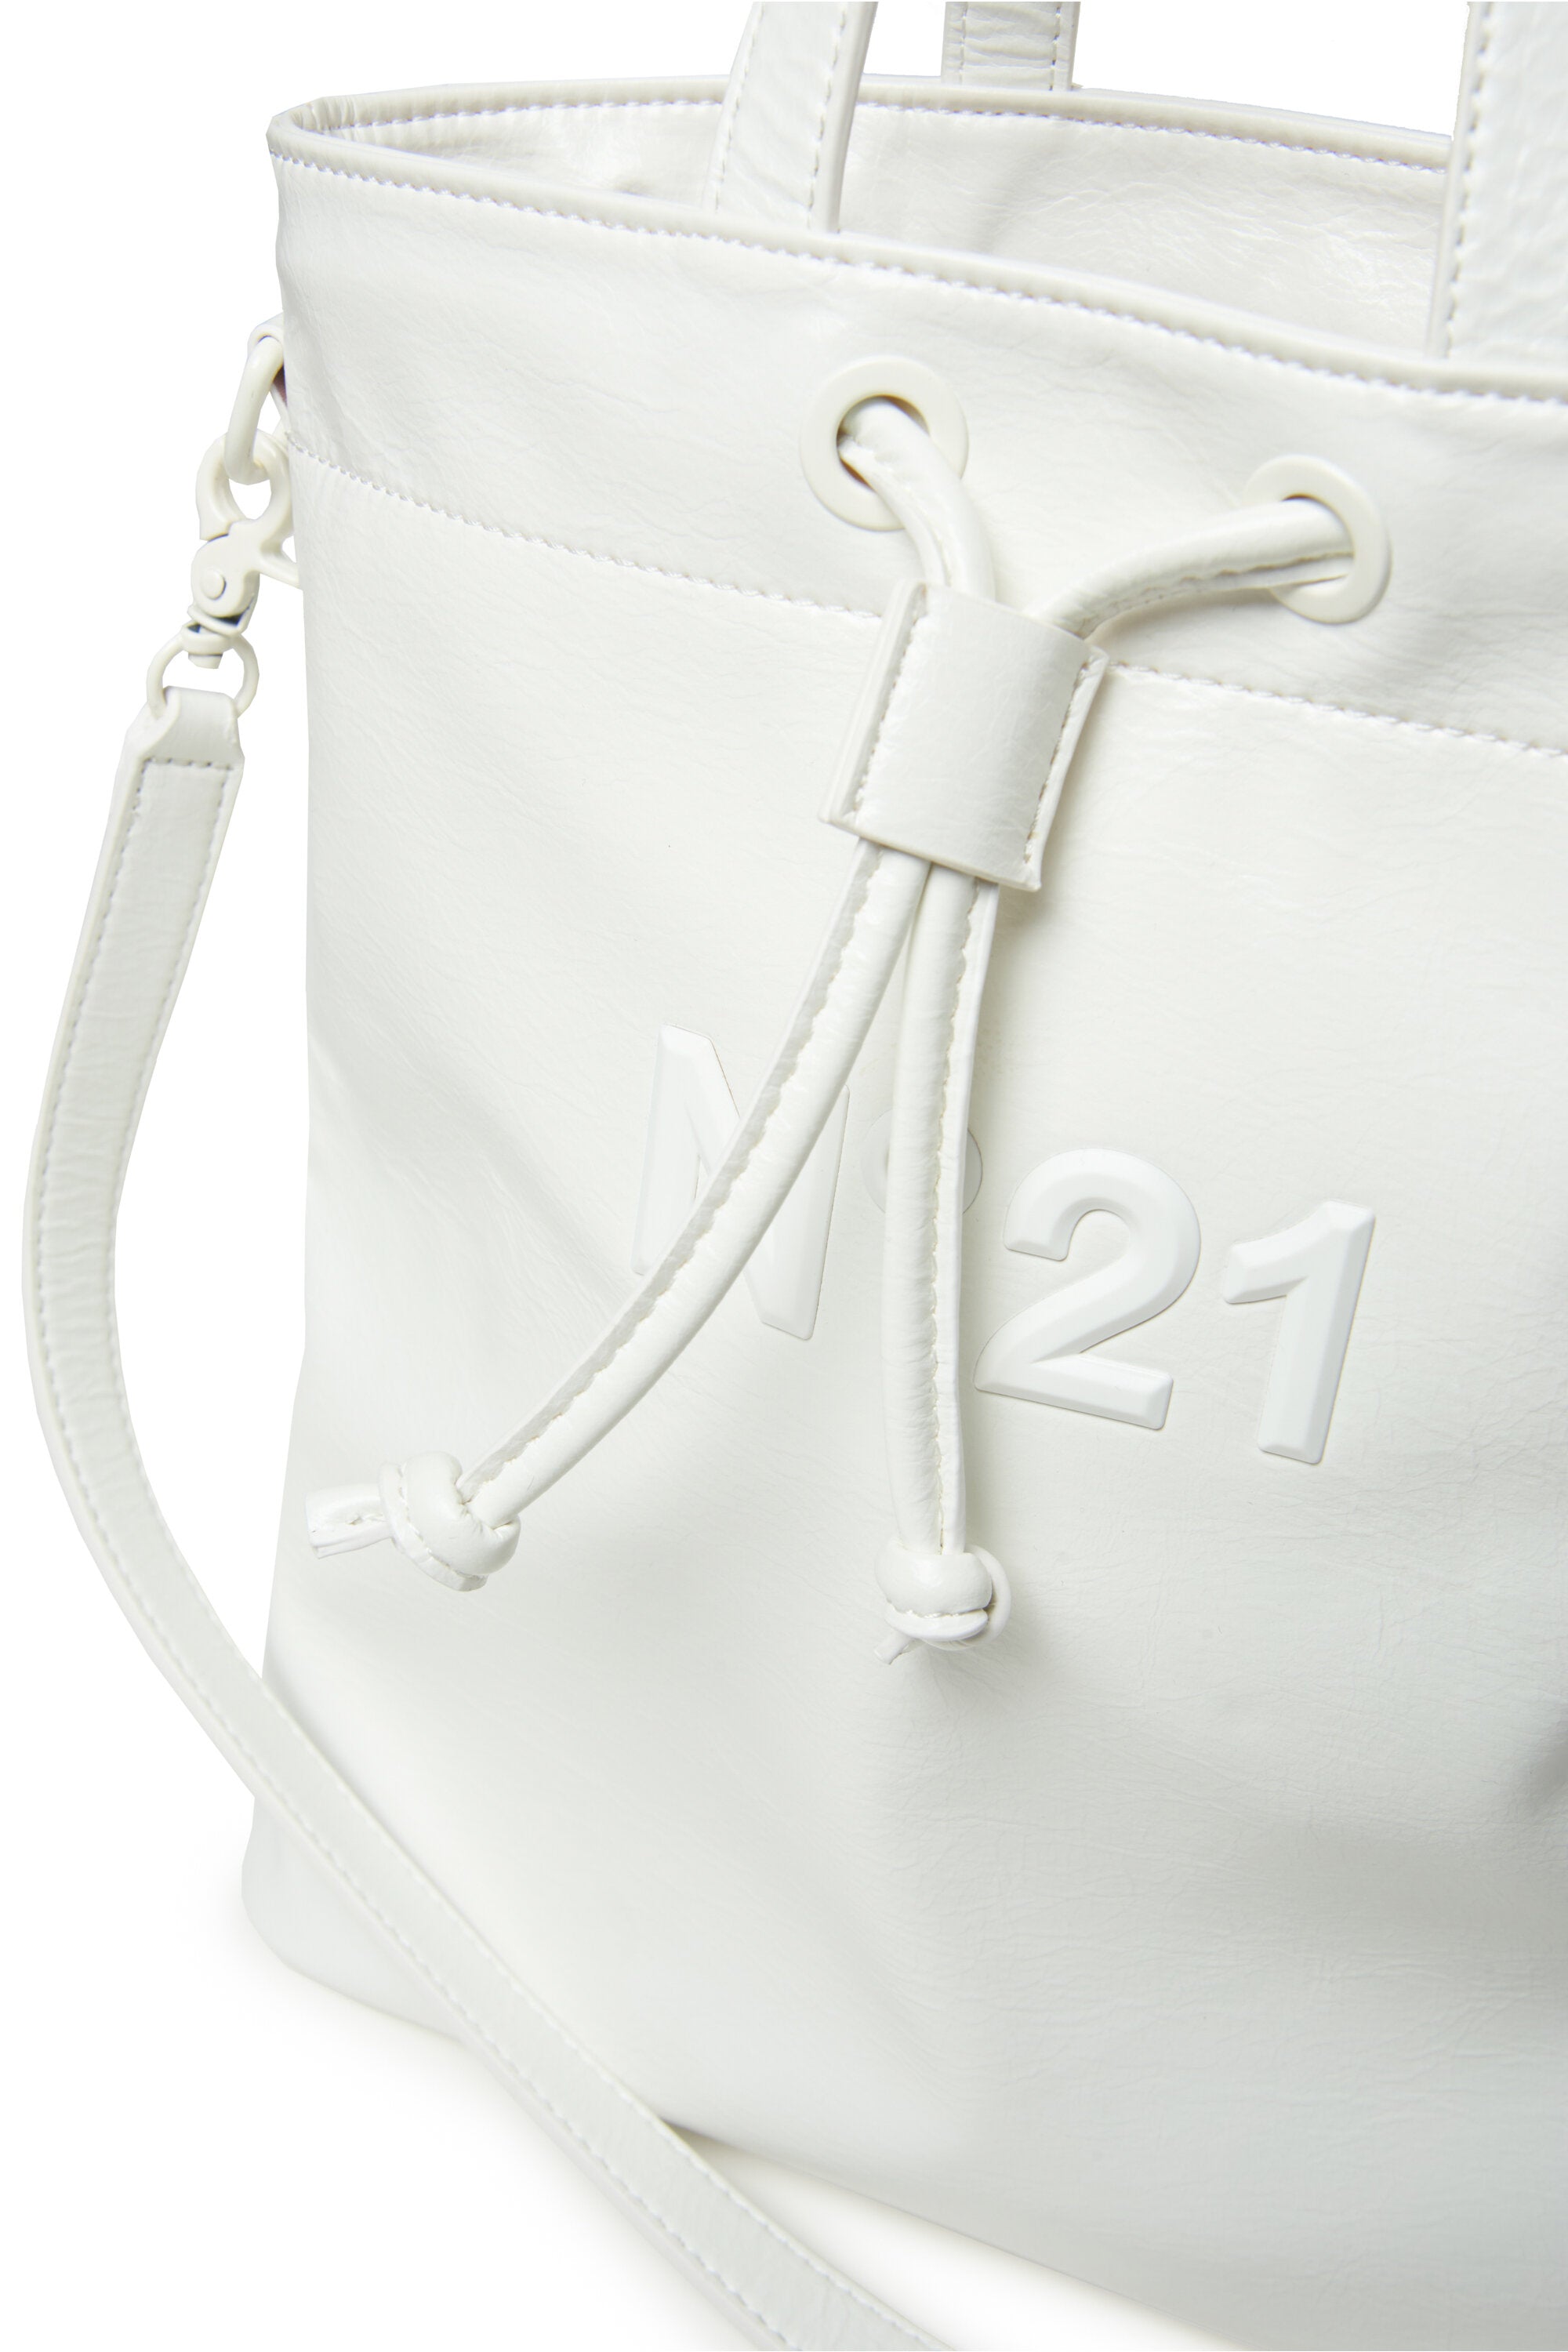 White bucket bag in leatherette with handles and shoulder strap